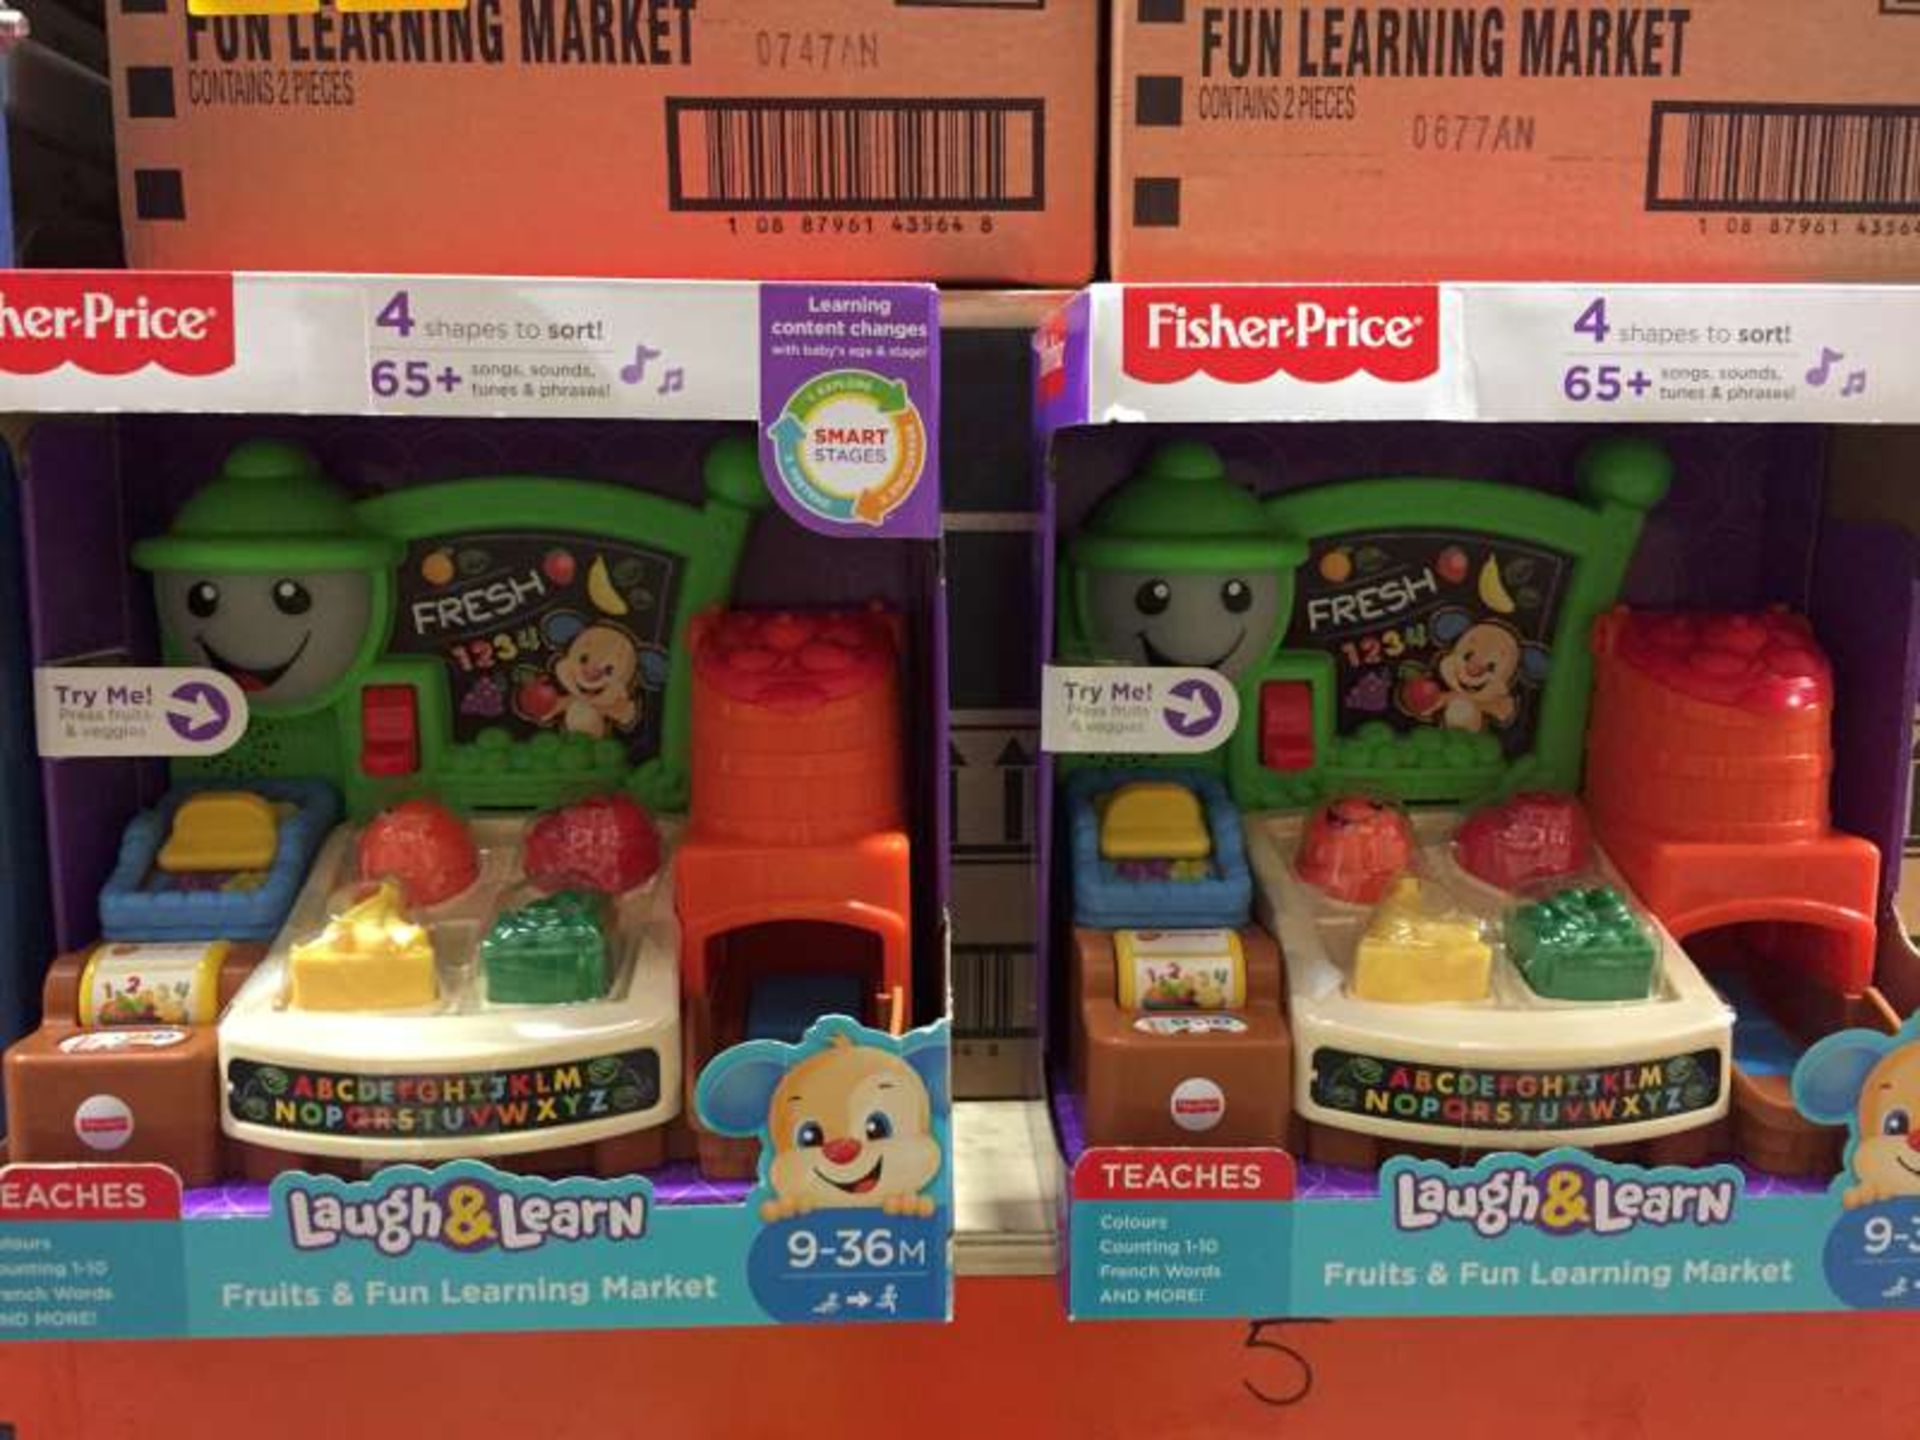 6 X BRAND NEW BOXED FISHER PRICE LAUGH AND LEARN FRUITS AND FUN LEARNING MARKET IN 2 BOXES AND 2 X